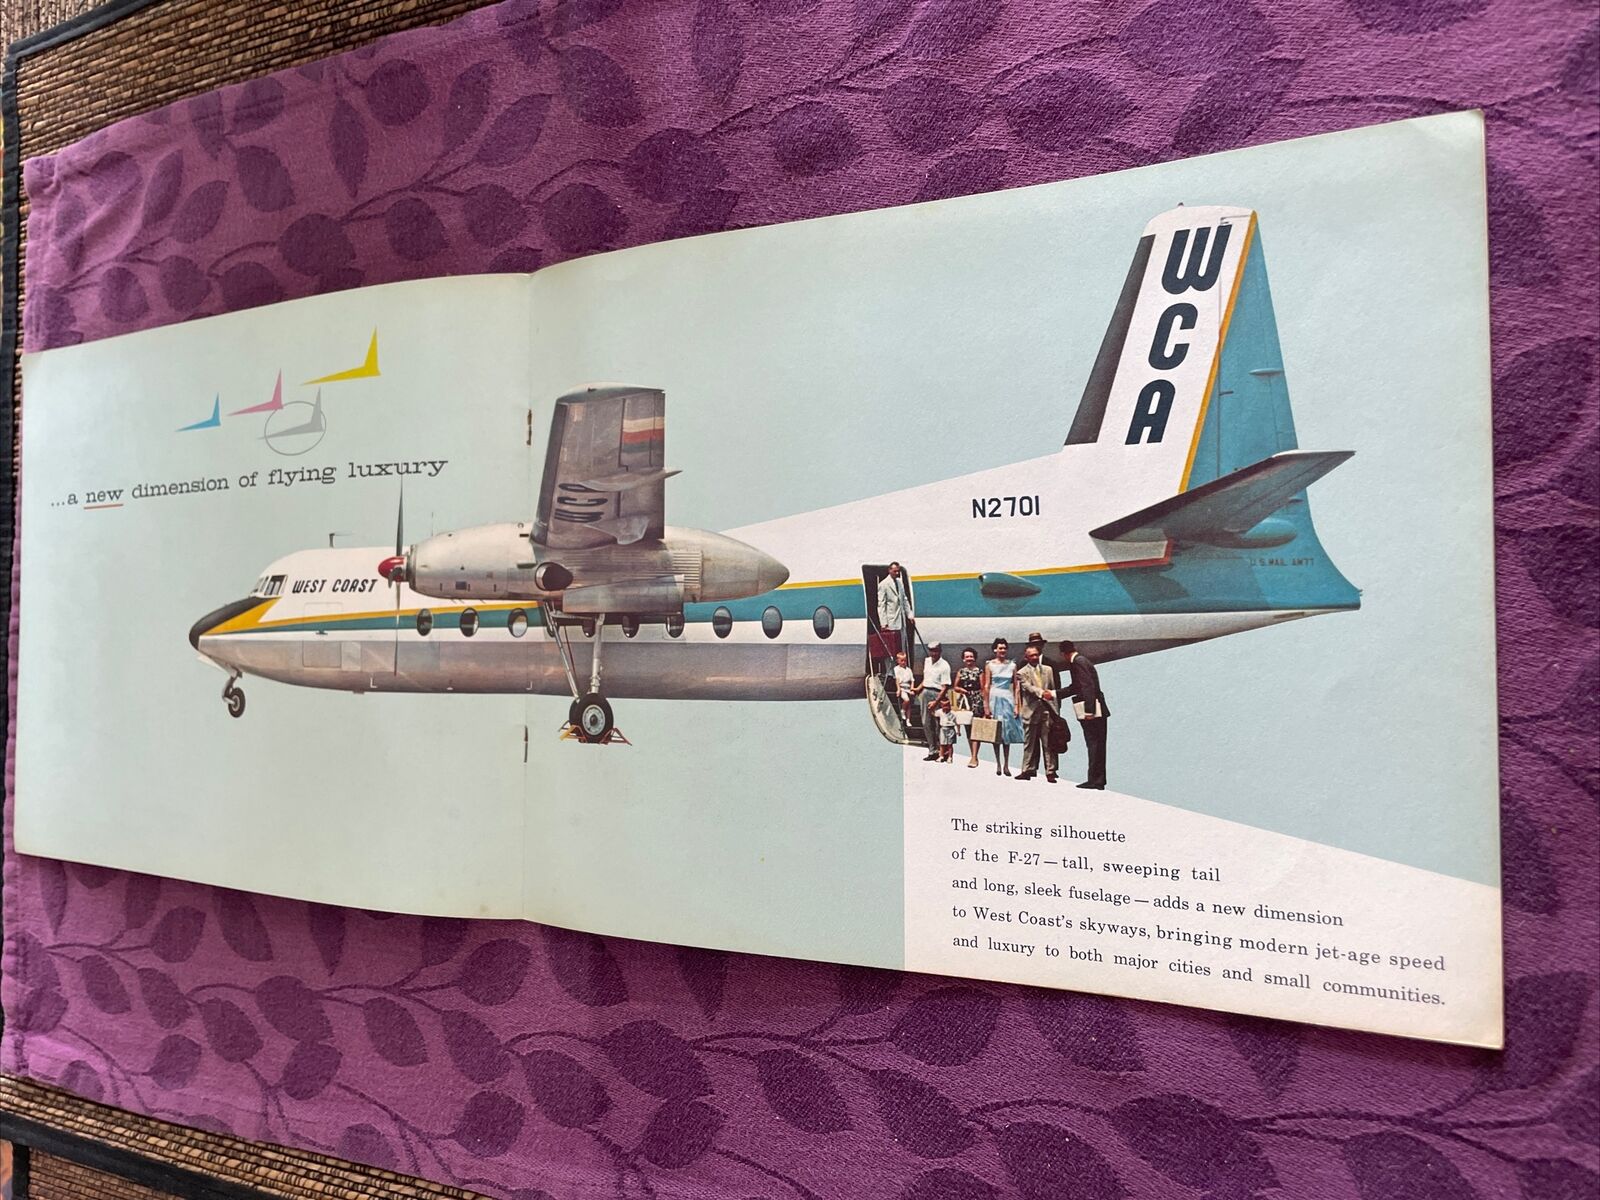 West Coast Airlines @1965 Fairchild  F-27  intro large  brochure